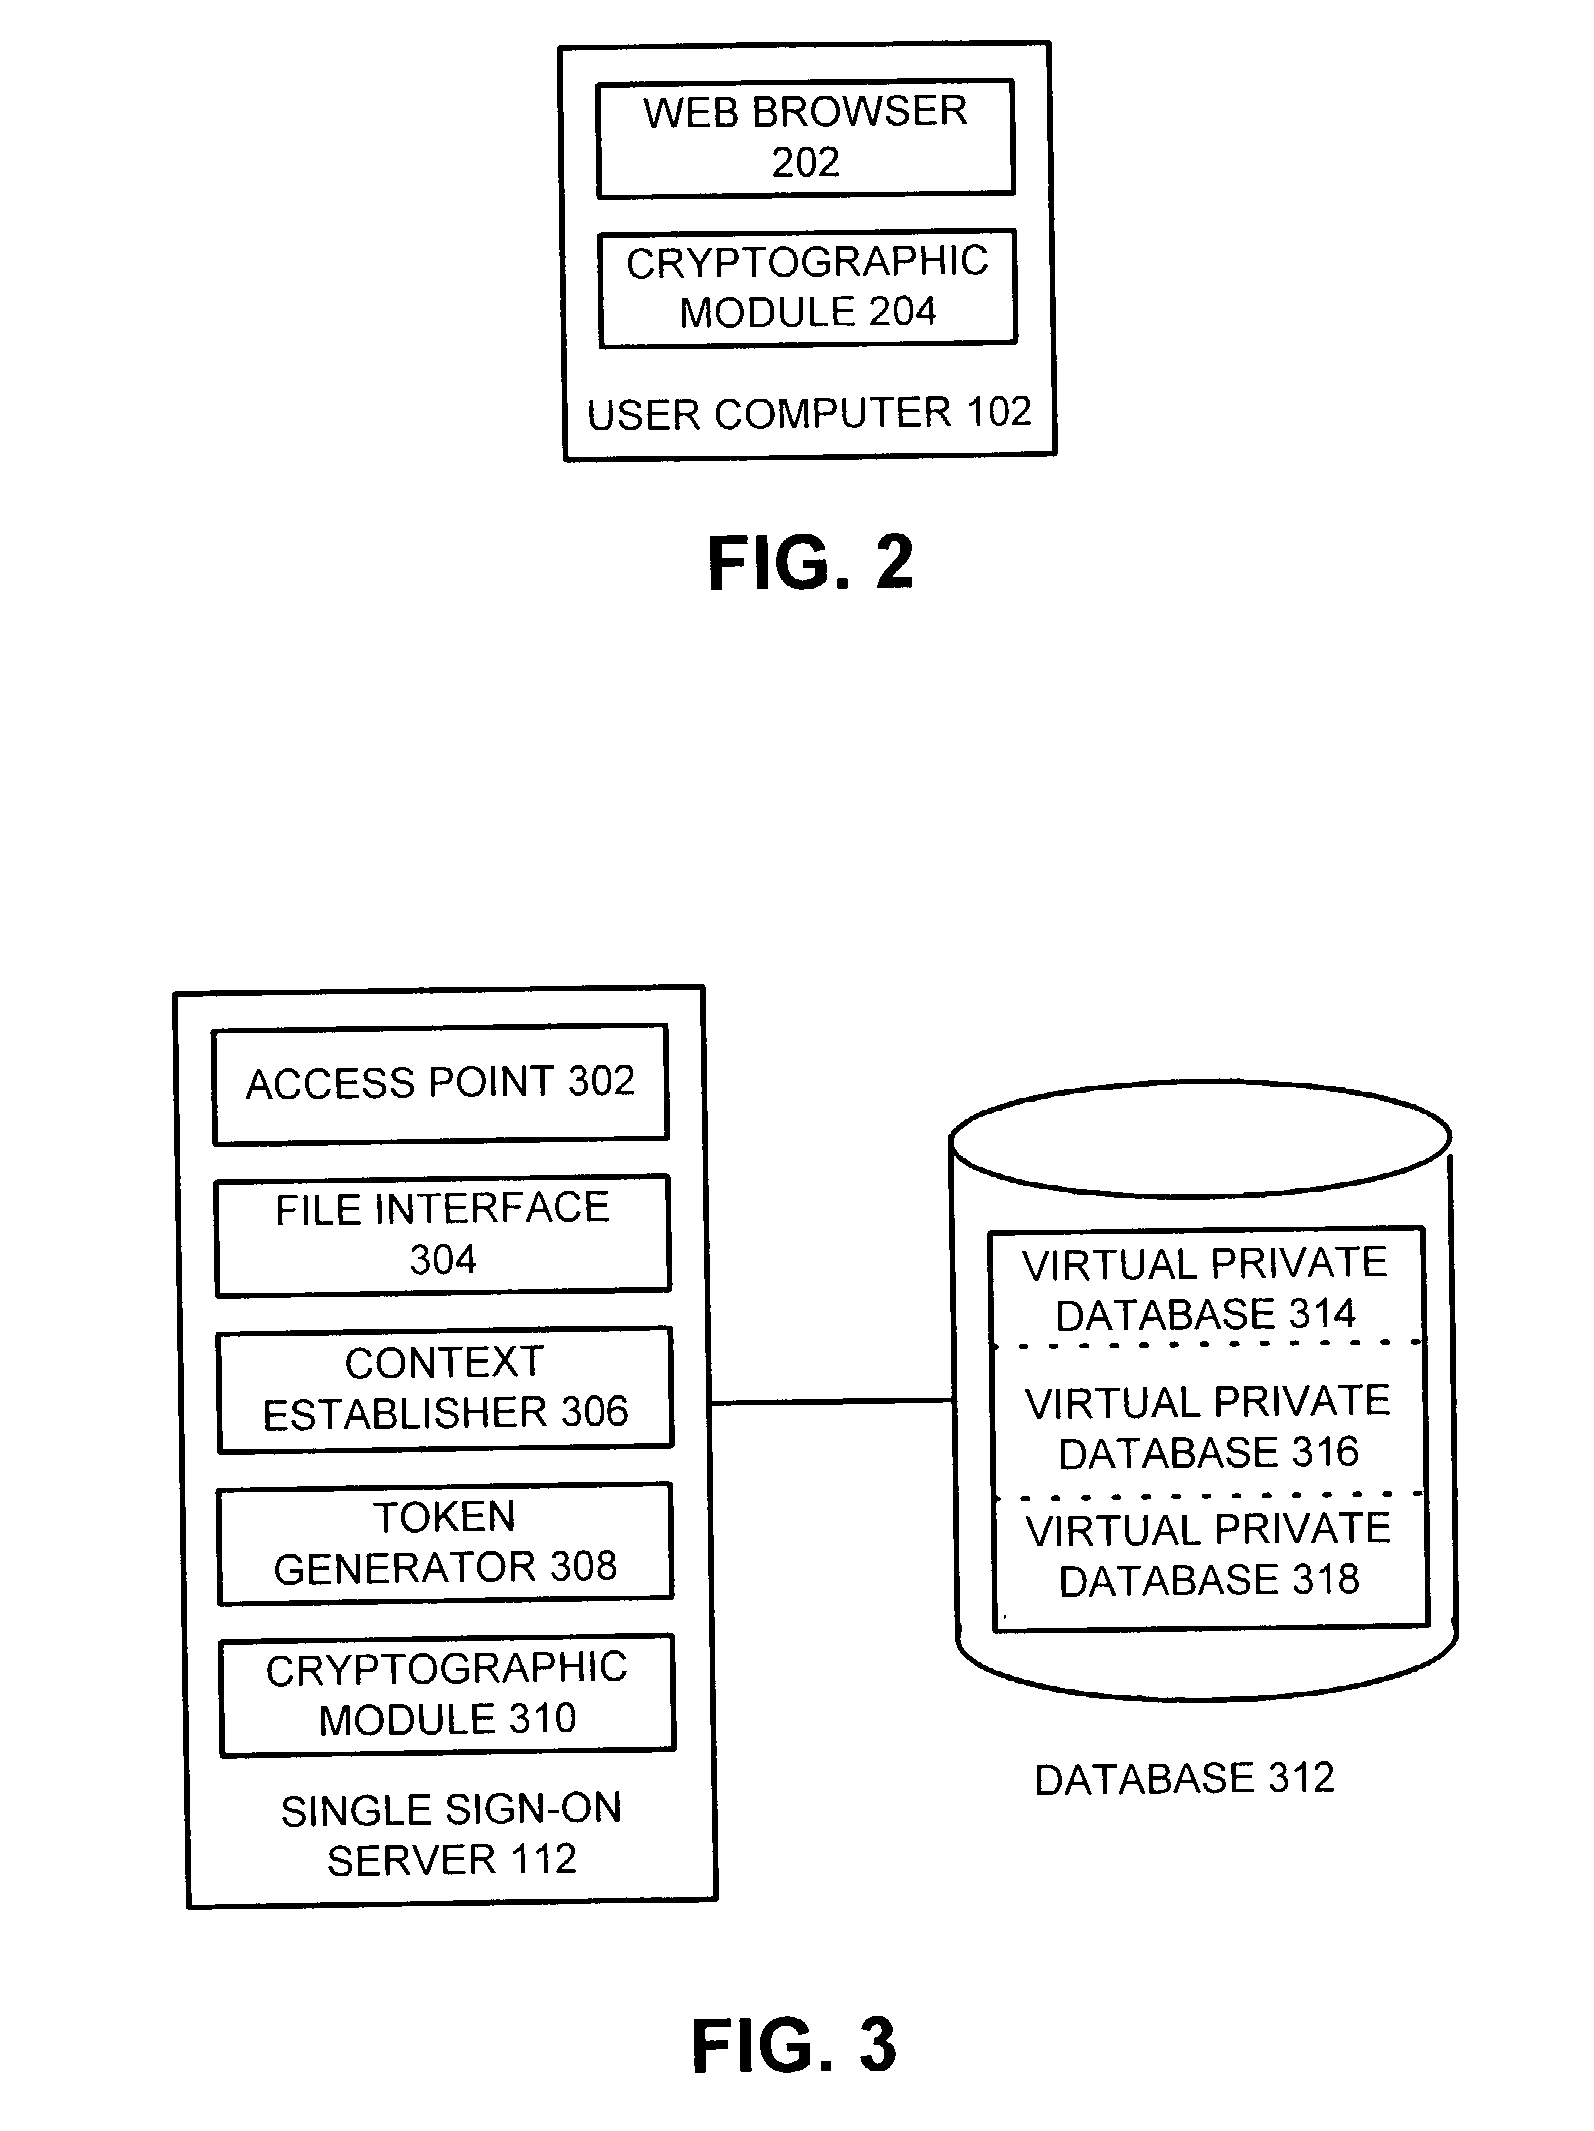 Method and apparatus to facilitate single sign-on services in a hosting environment